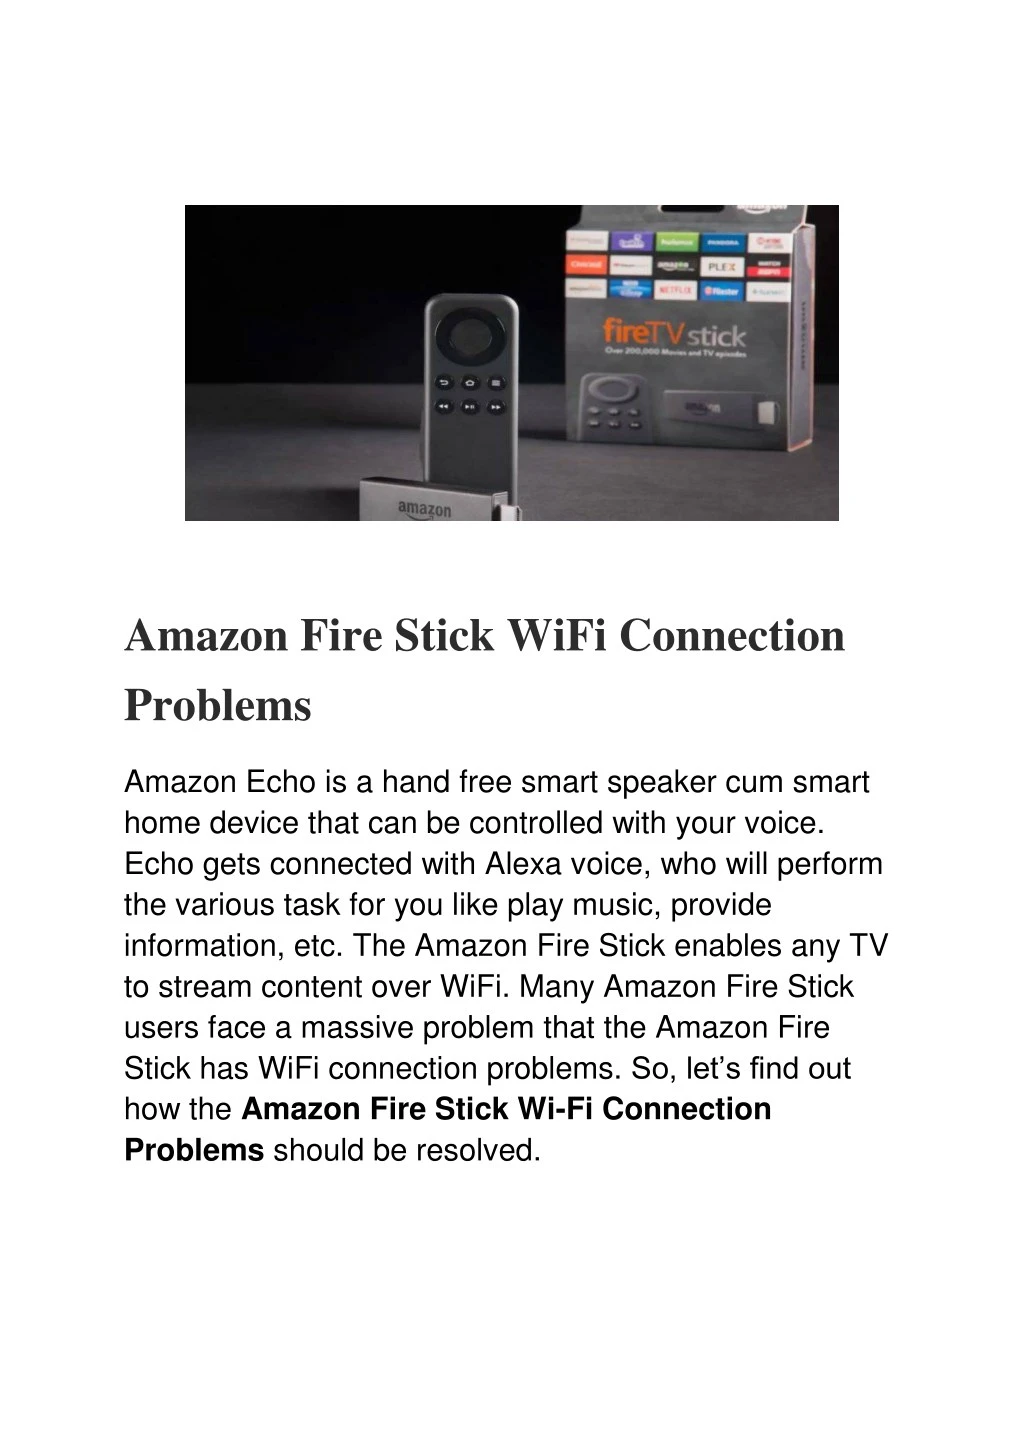 amazon fire stick wifi connection problems